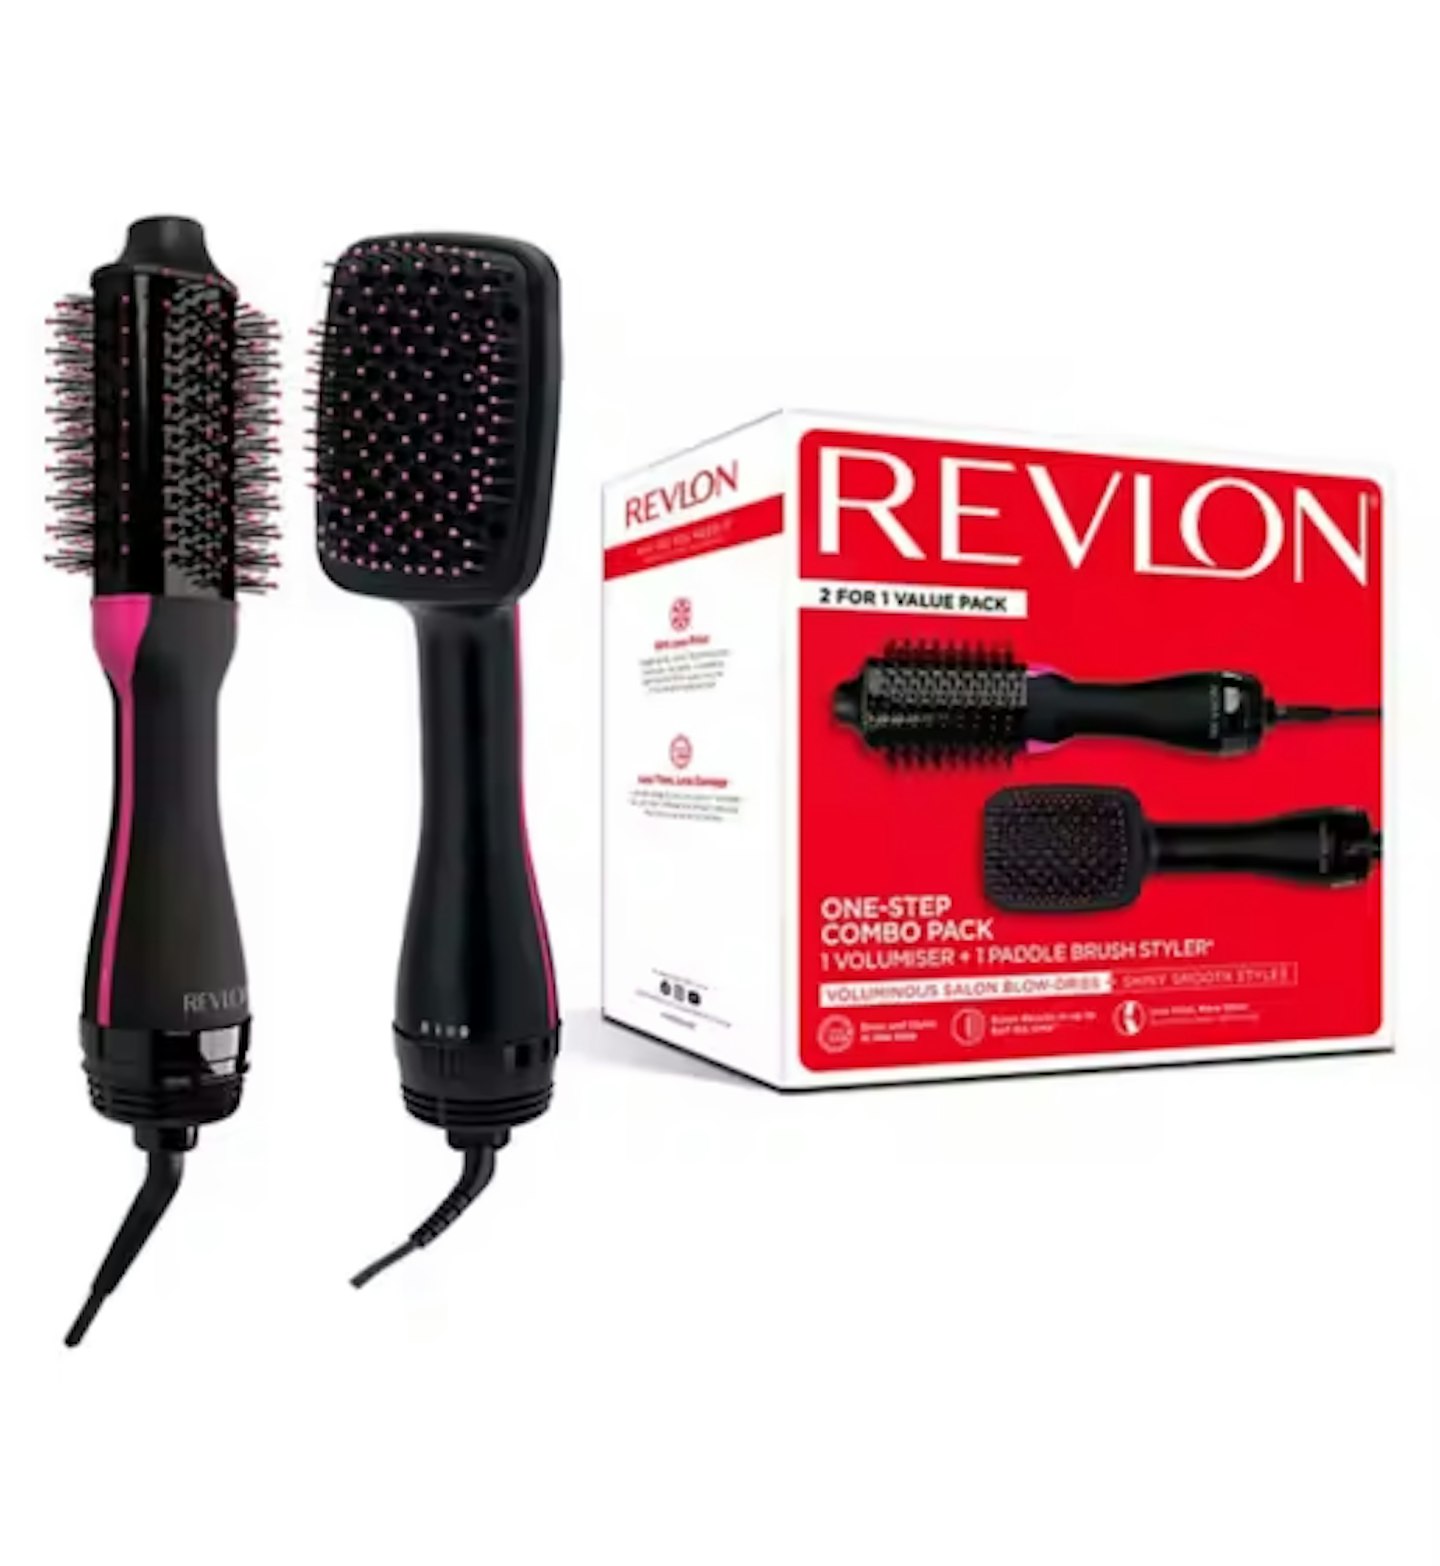 Revlon Salon One-Step Combo Pack: One Volumiser and One Paddle Dryer